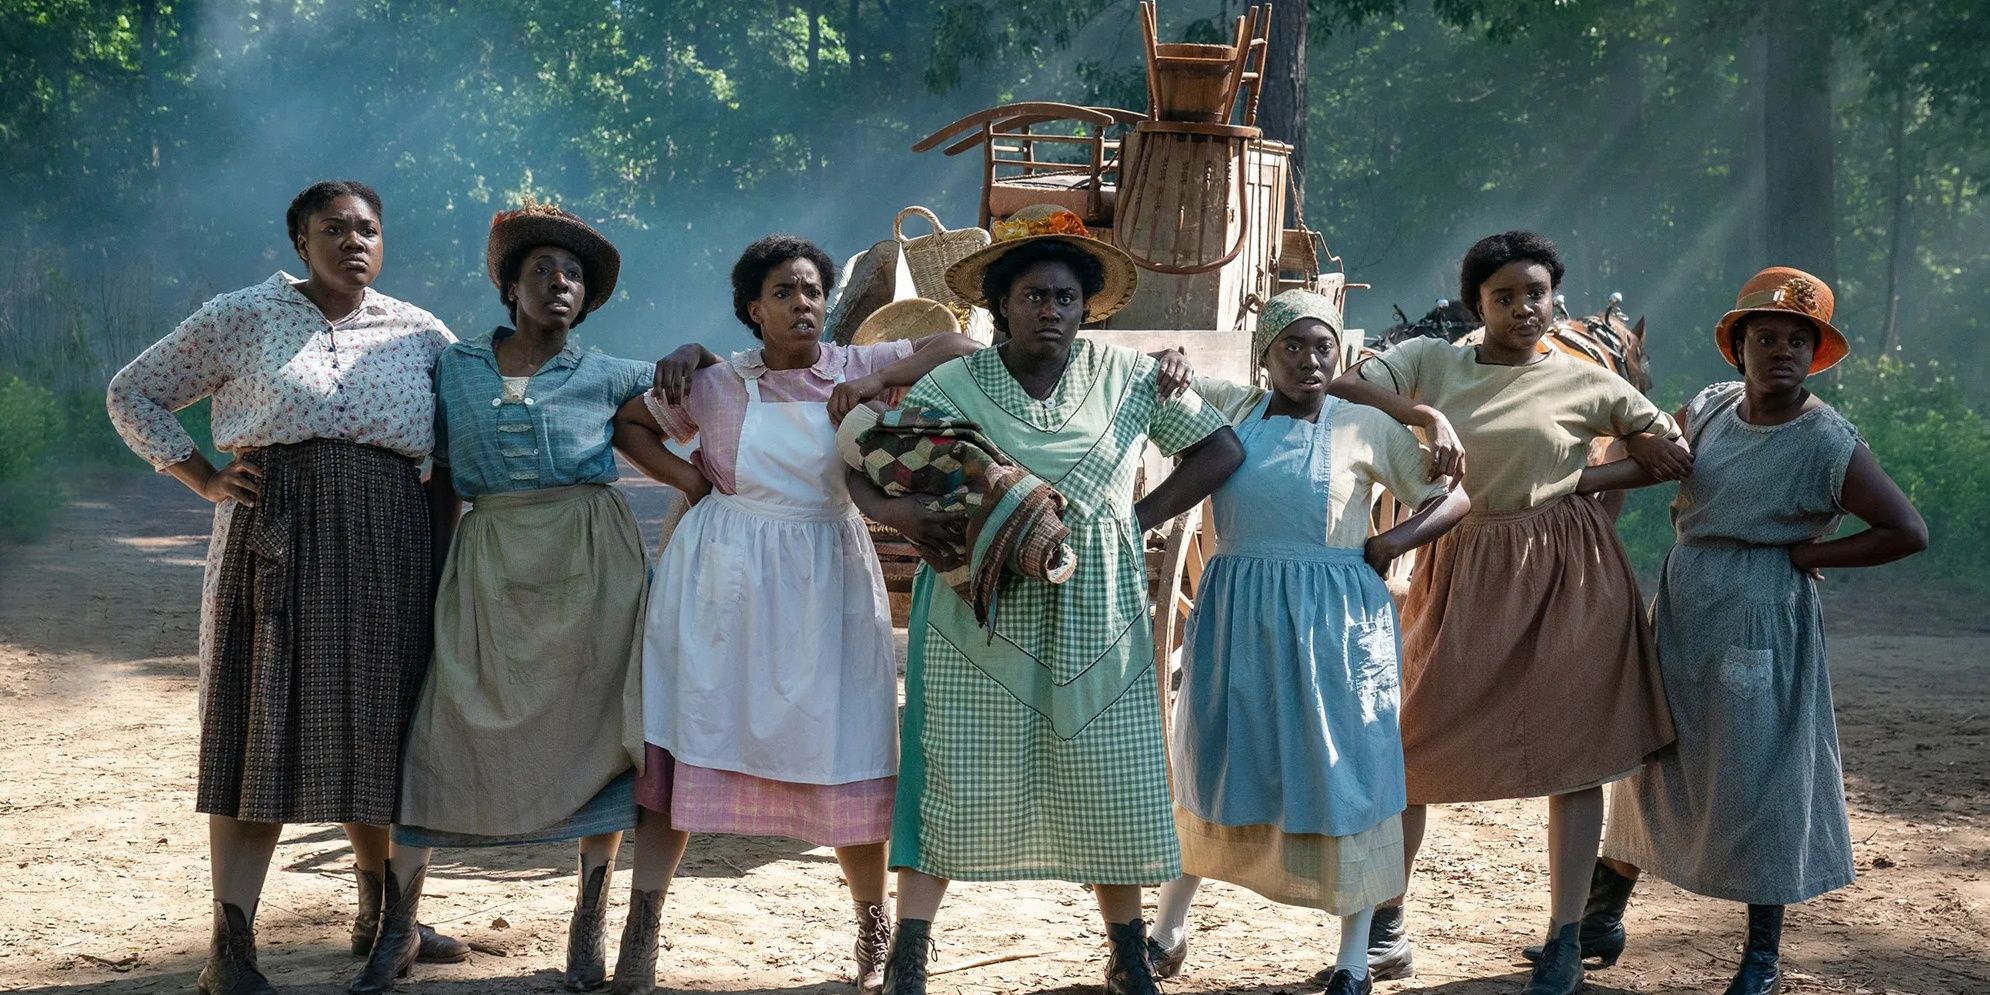 How Does the New ‘The Color Purple’ Differ From Spielberg’s Adaptation